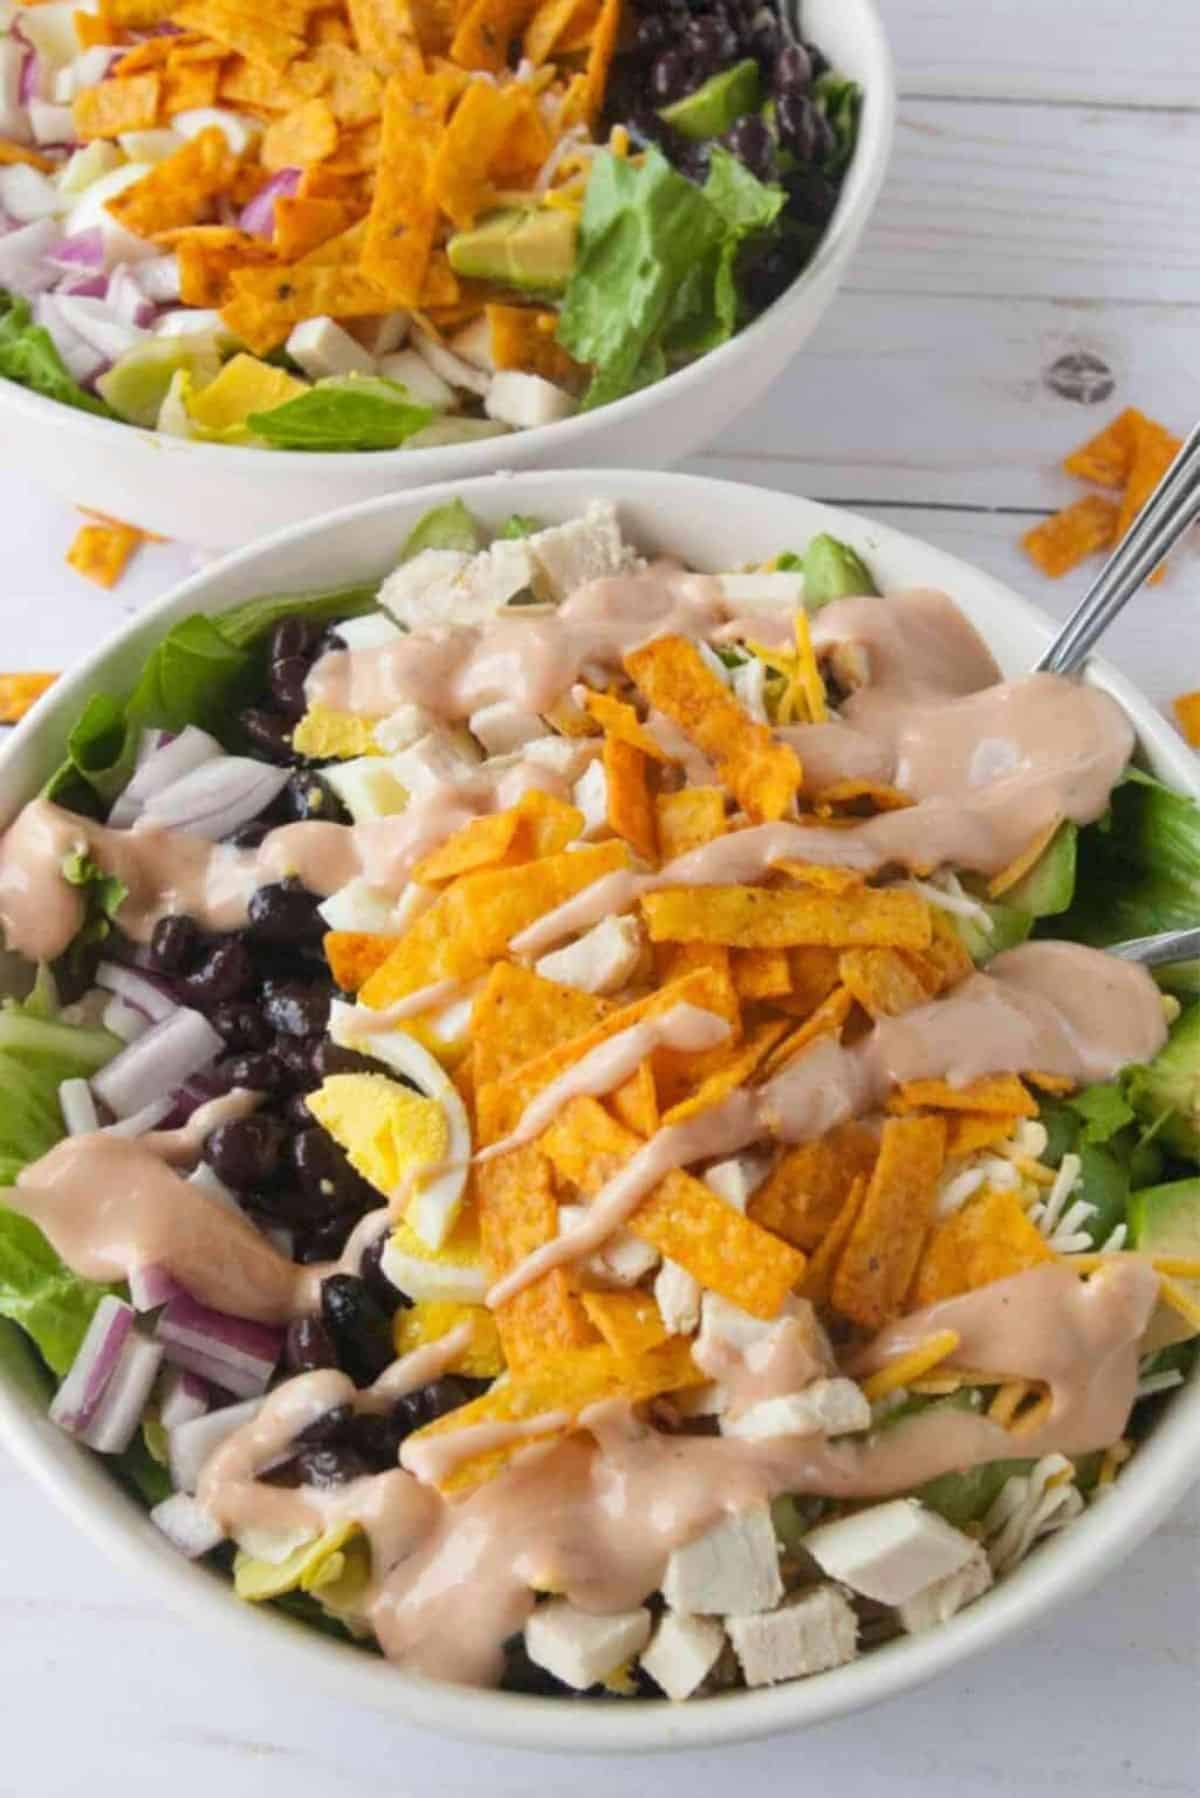 Scrumptious Southern BBQ Chicken Salad with Barbecue Dressing in a white bowl.